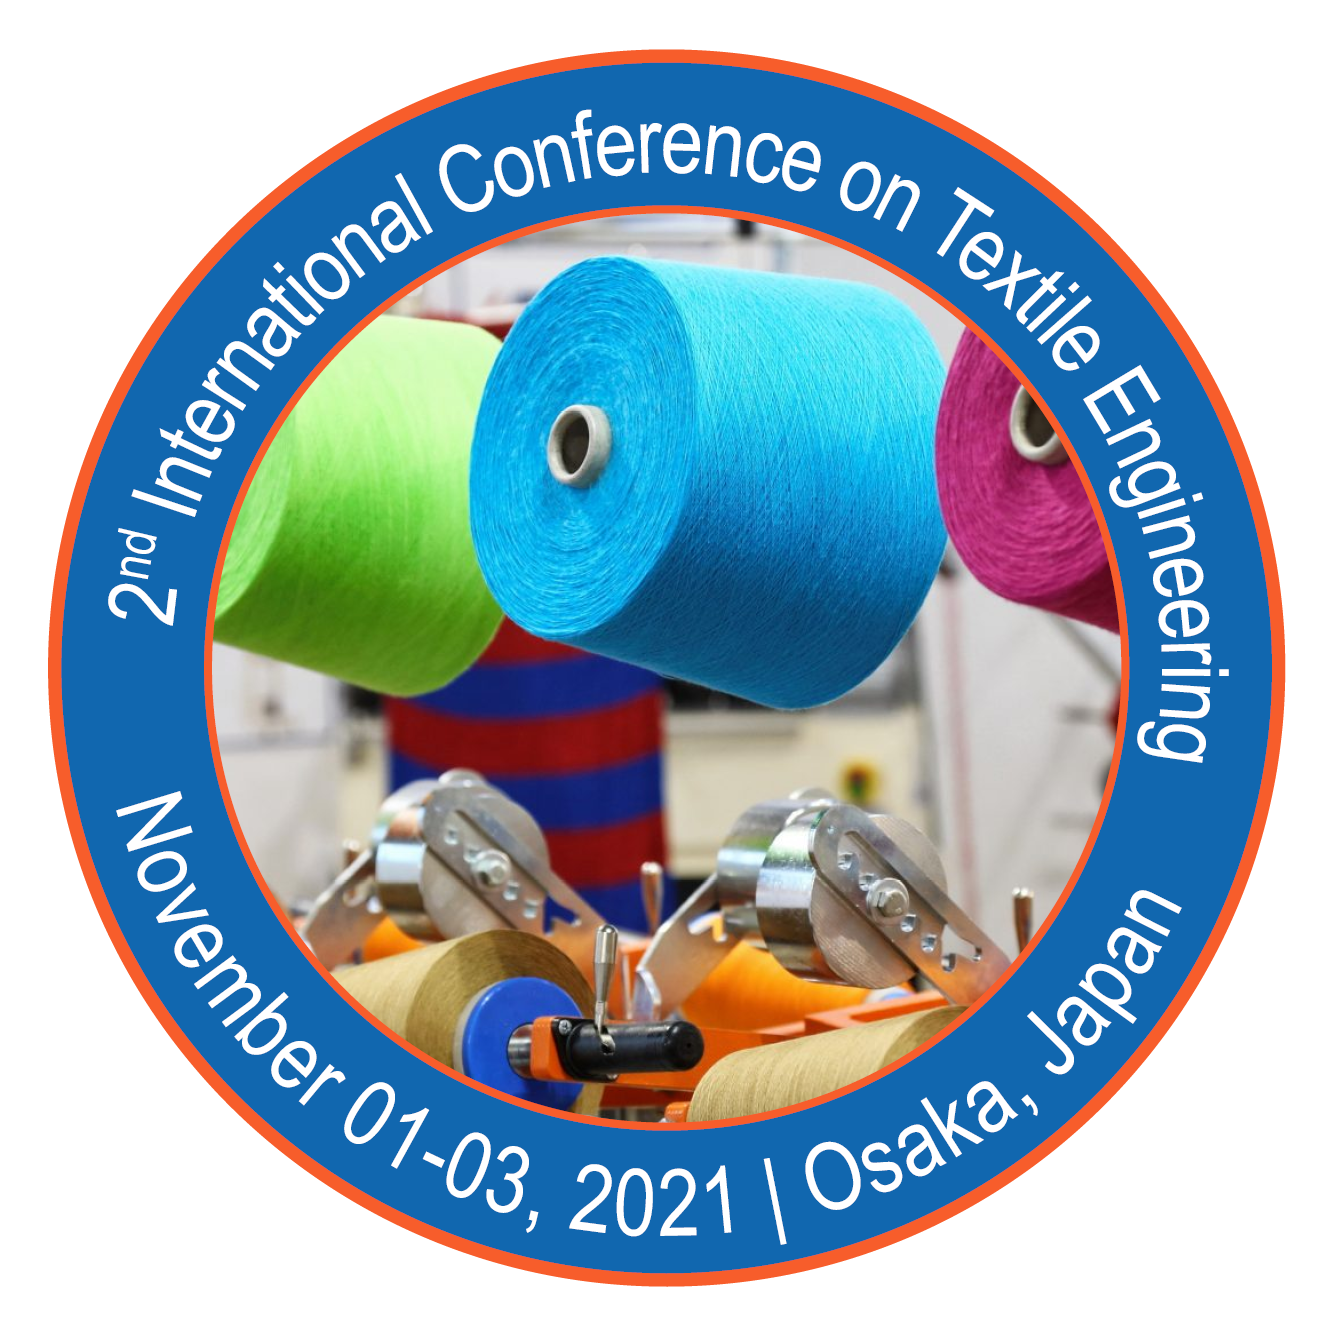 2nd International Conference on Textile Engineering